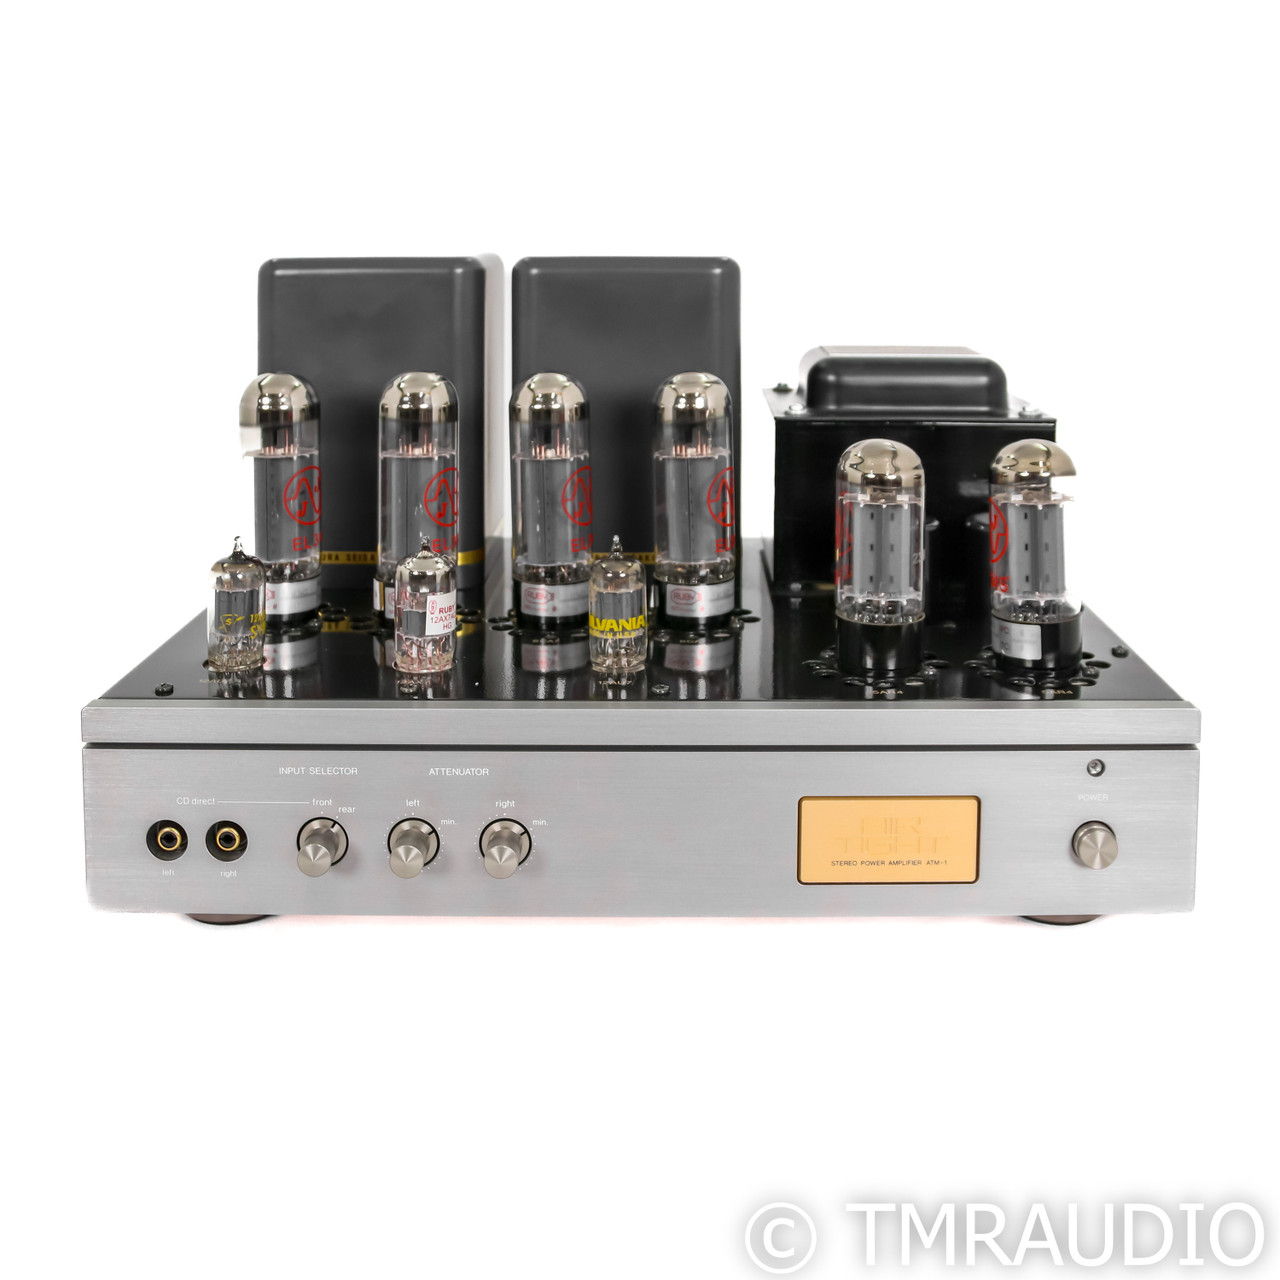 Air Tight ATM1 Stereo Tube Power Amplifier (64143)